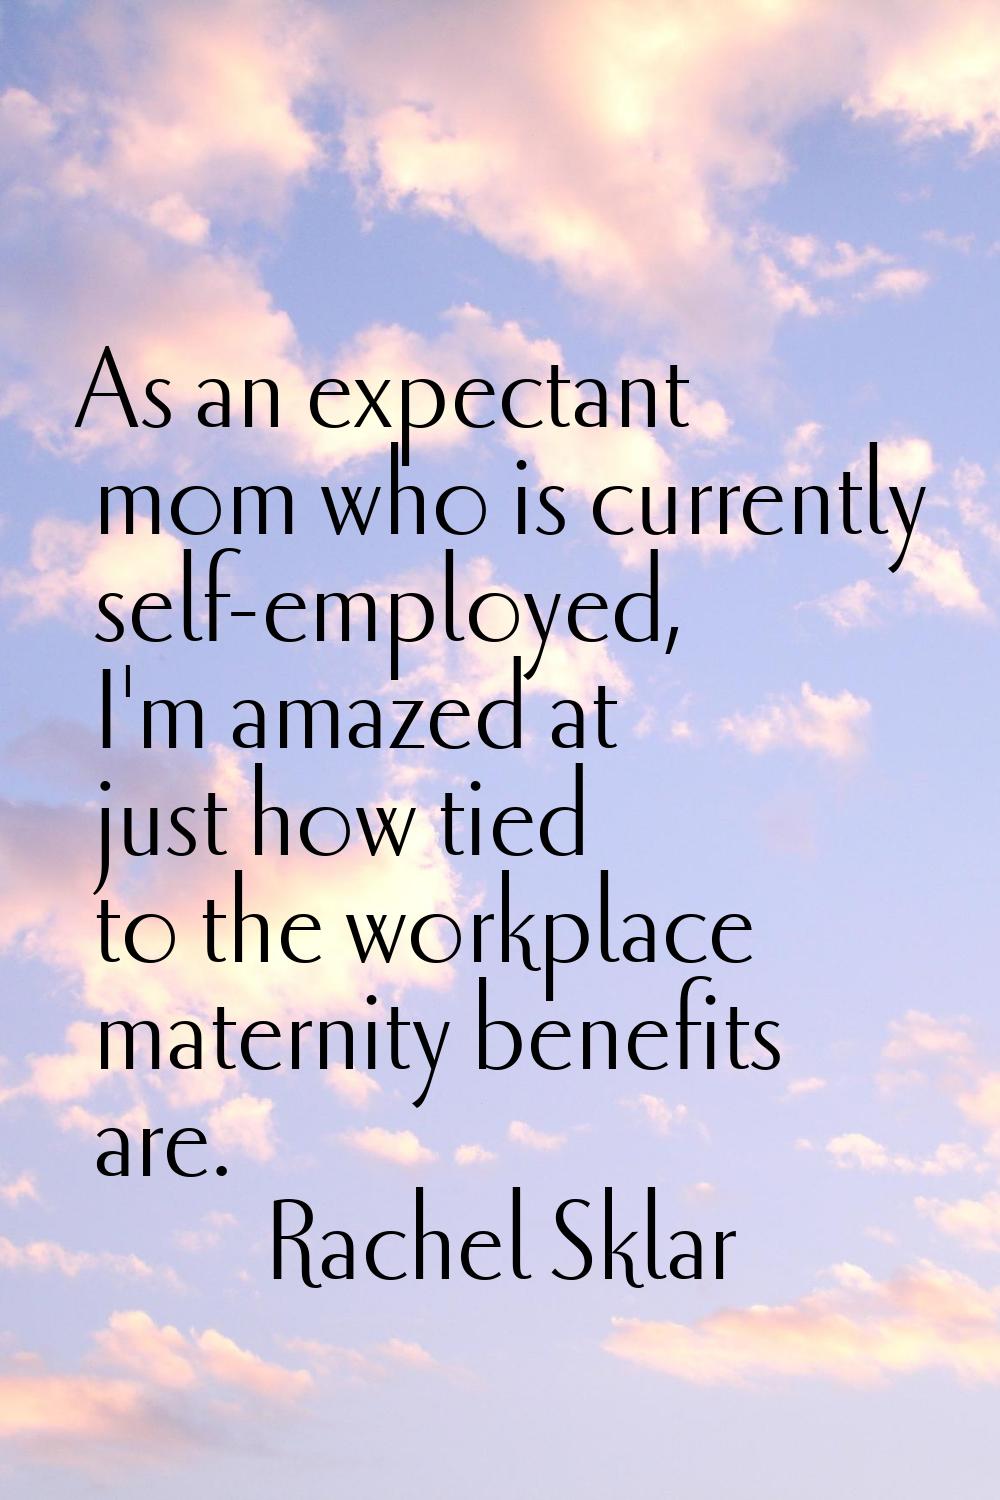 As an expectant mom who is currently self-employed, I'm amazed at just how tied to the workplace ma